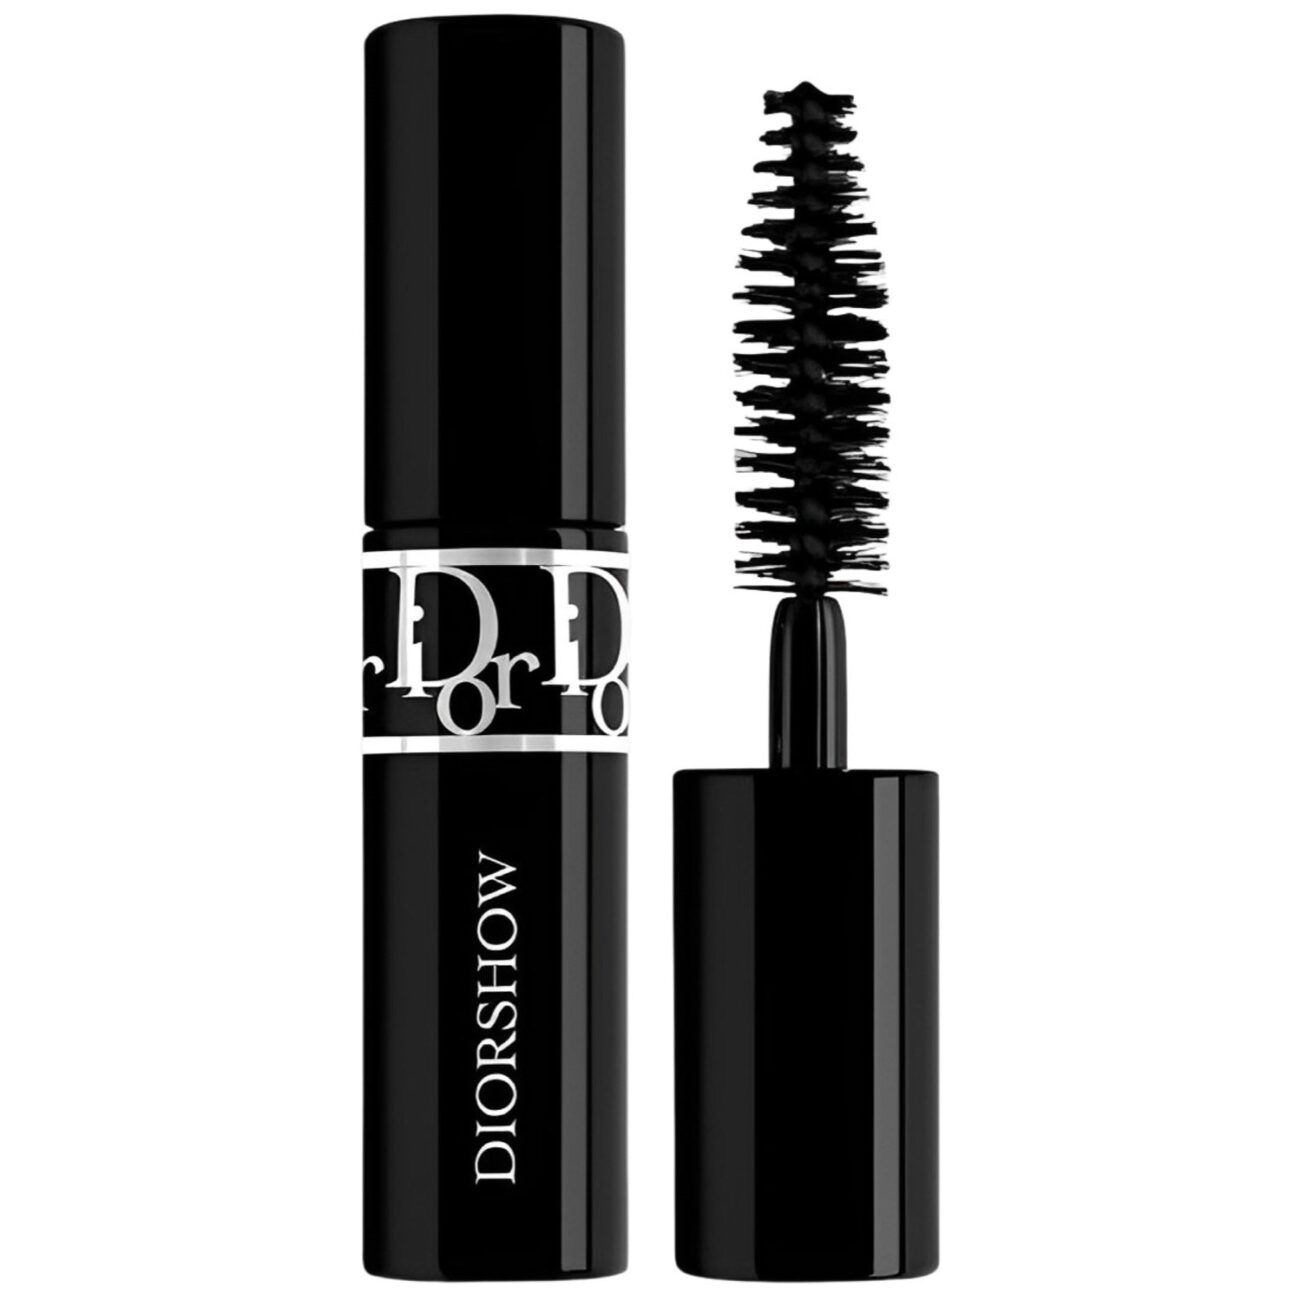 Diorshow 24h Buildable Volume Mascara trial size-DIOR